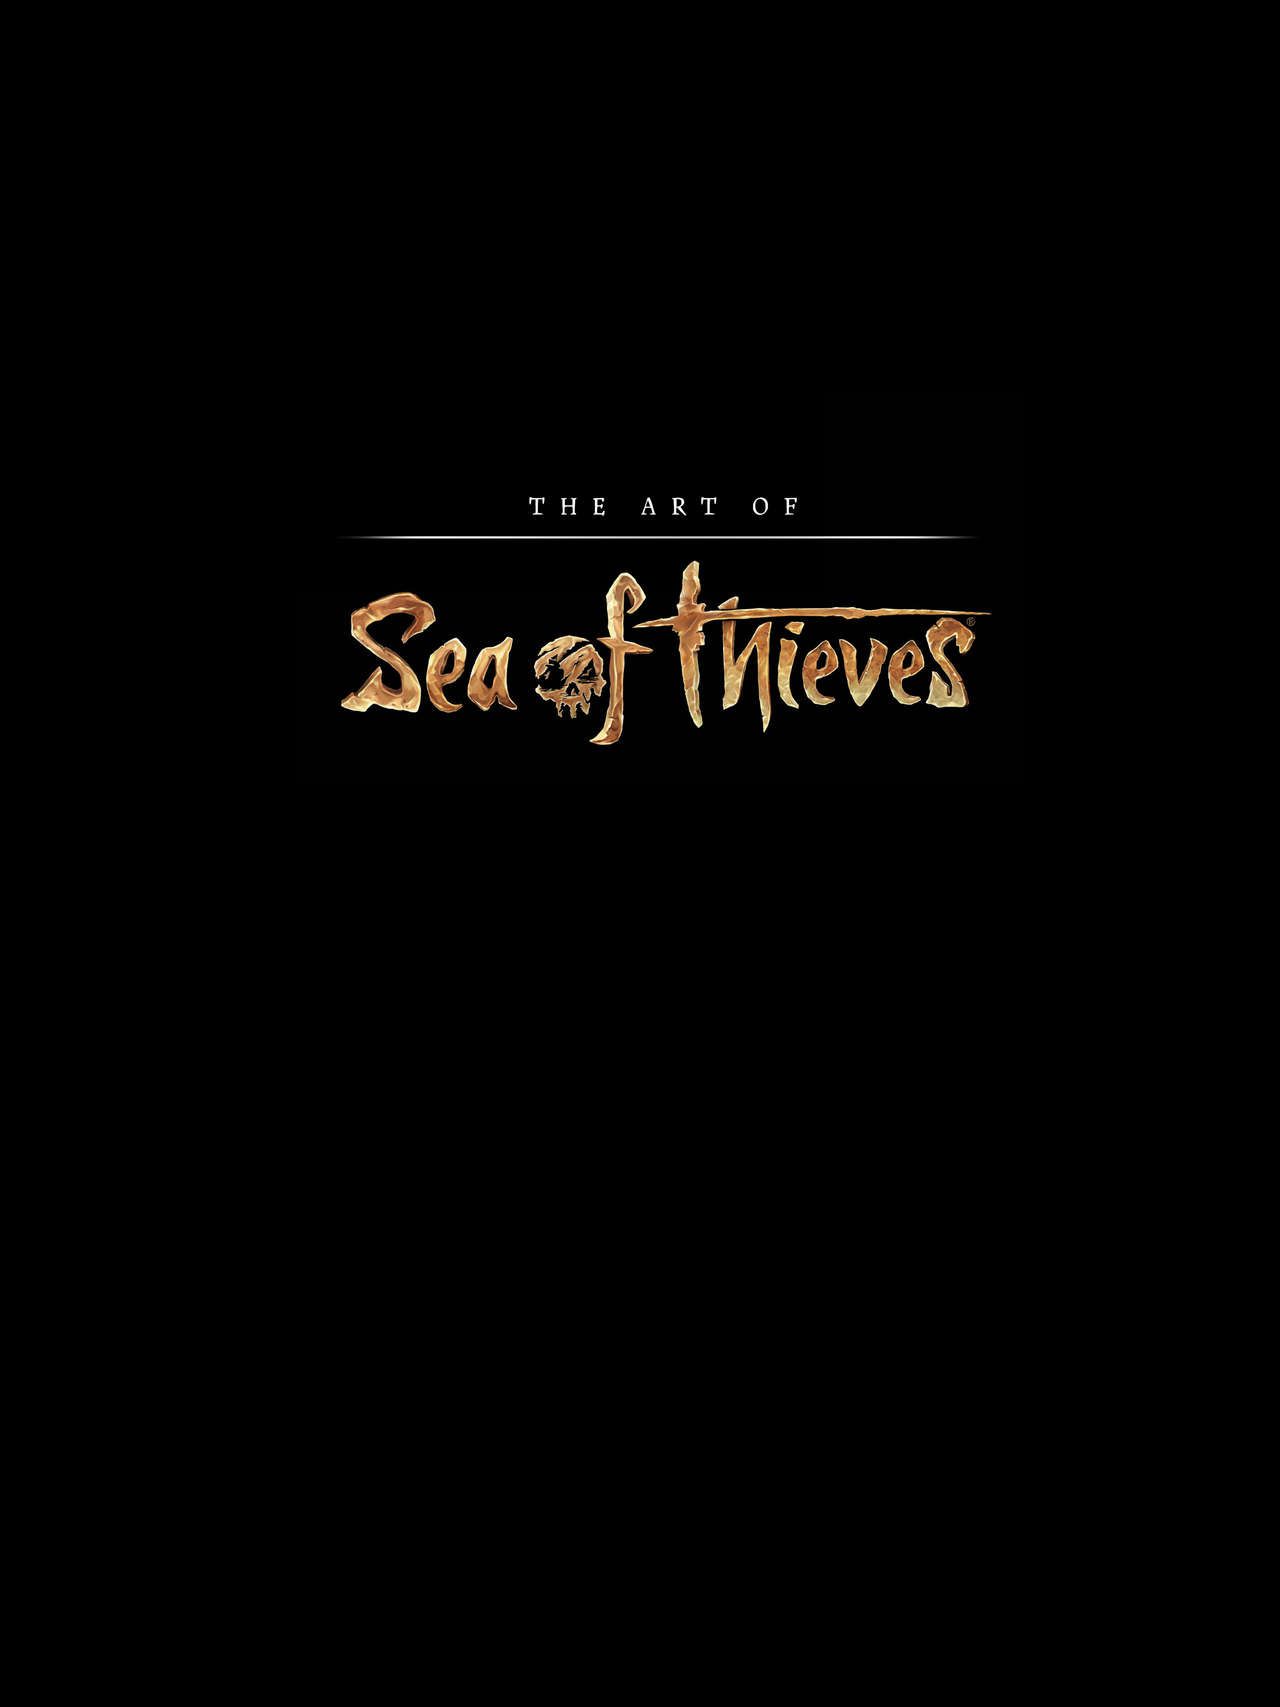 The Art of Sea of Thieves 3